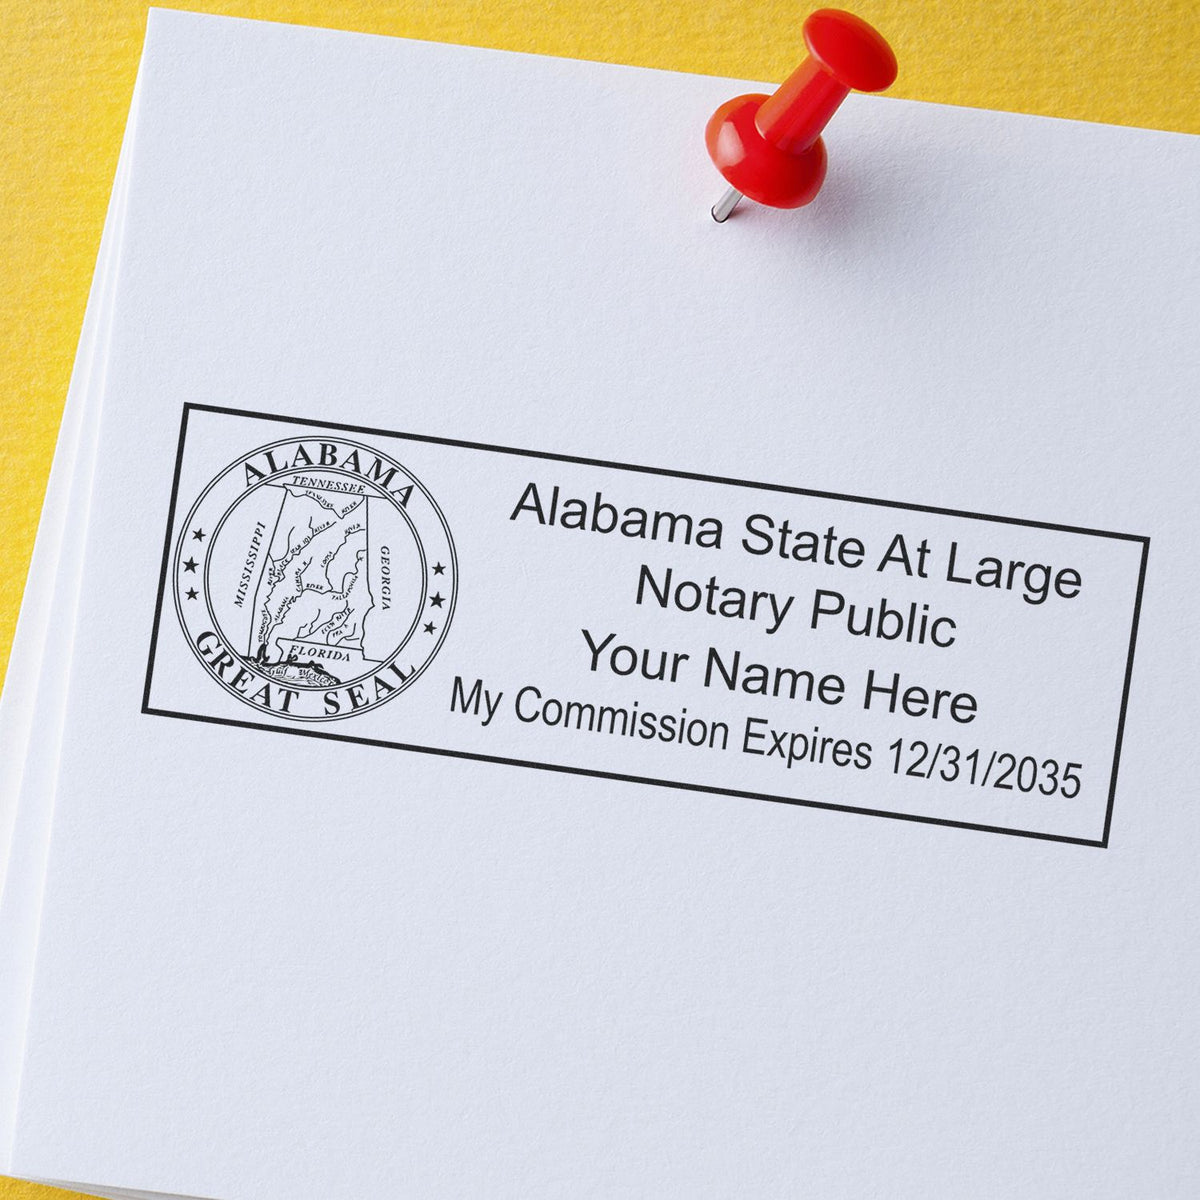 The main image for the Wooden Handle Alabama State Seal Notary Public Stamp depicting a sample of the imprint and electronic files